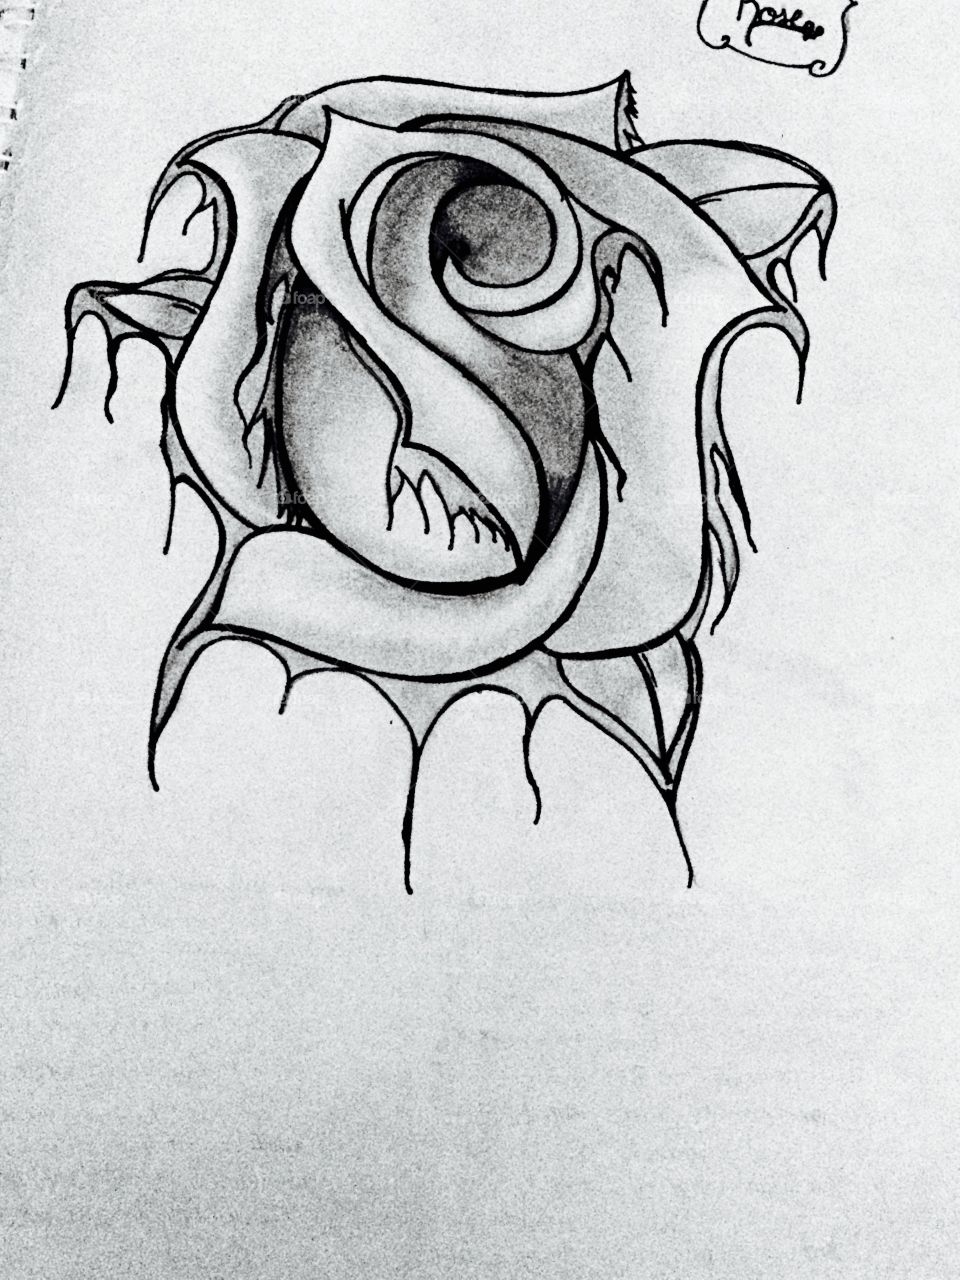 A blossoming flower that bleeds. A personal piece I did. Possibly a tattoo idea